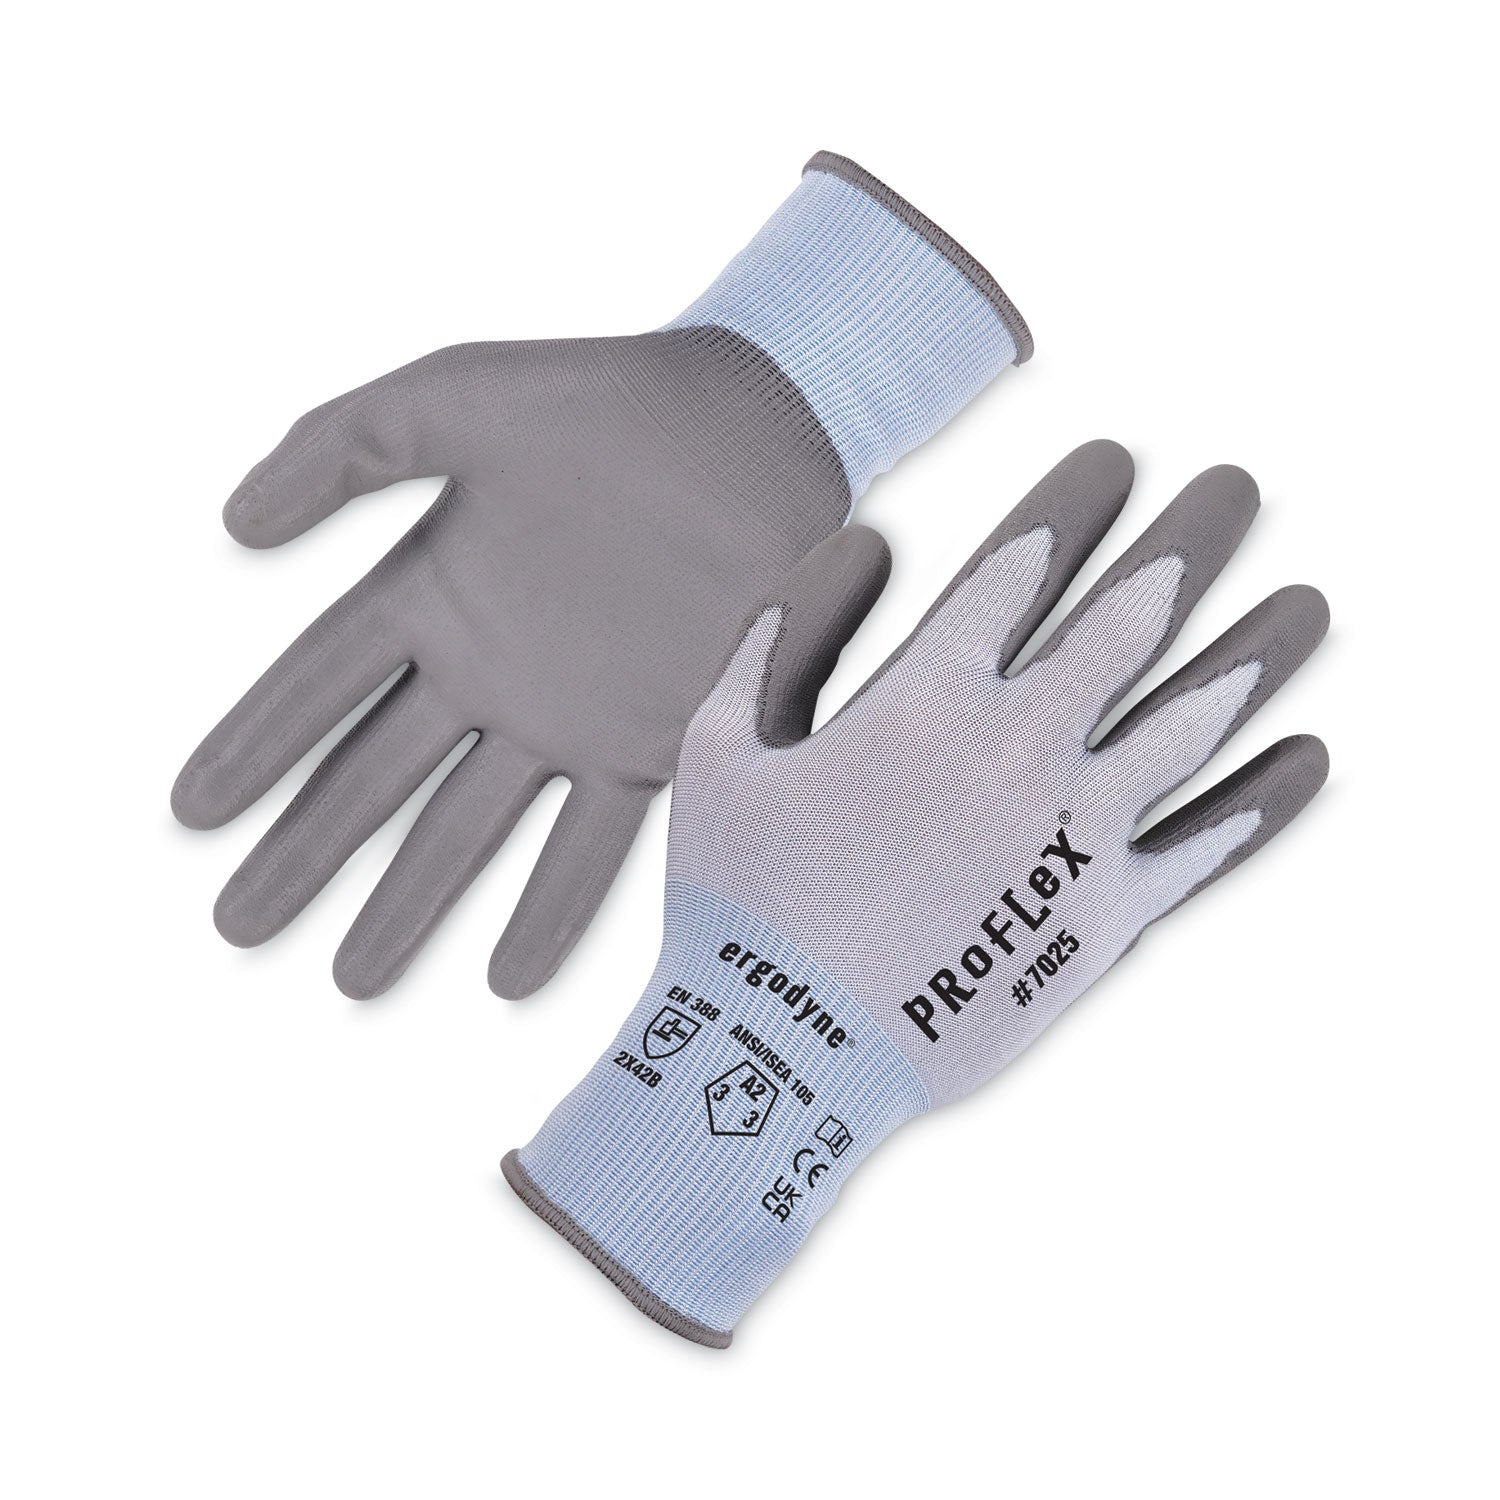 proflex-7025-ansi-a2-pu-coated-cr-gloves-blue-small-12-pairs-pack-ships-in-1-3-business-days_ego10422 - 1